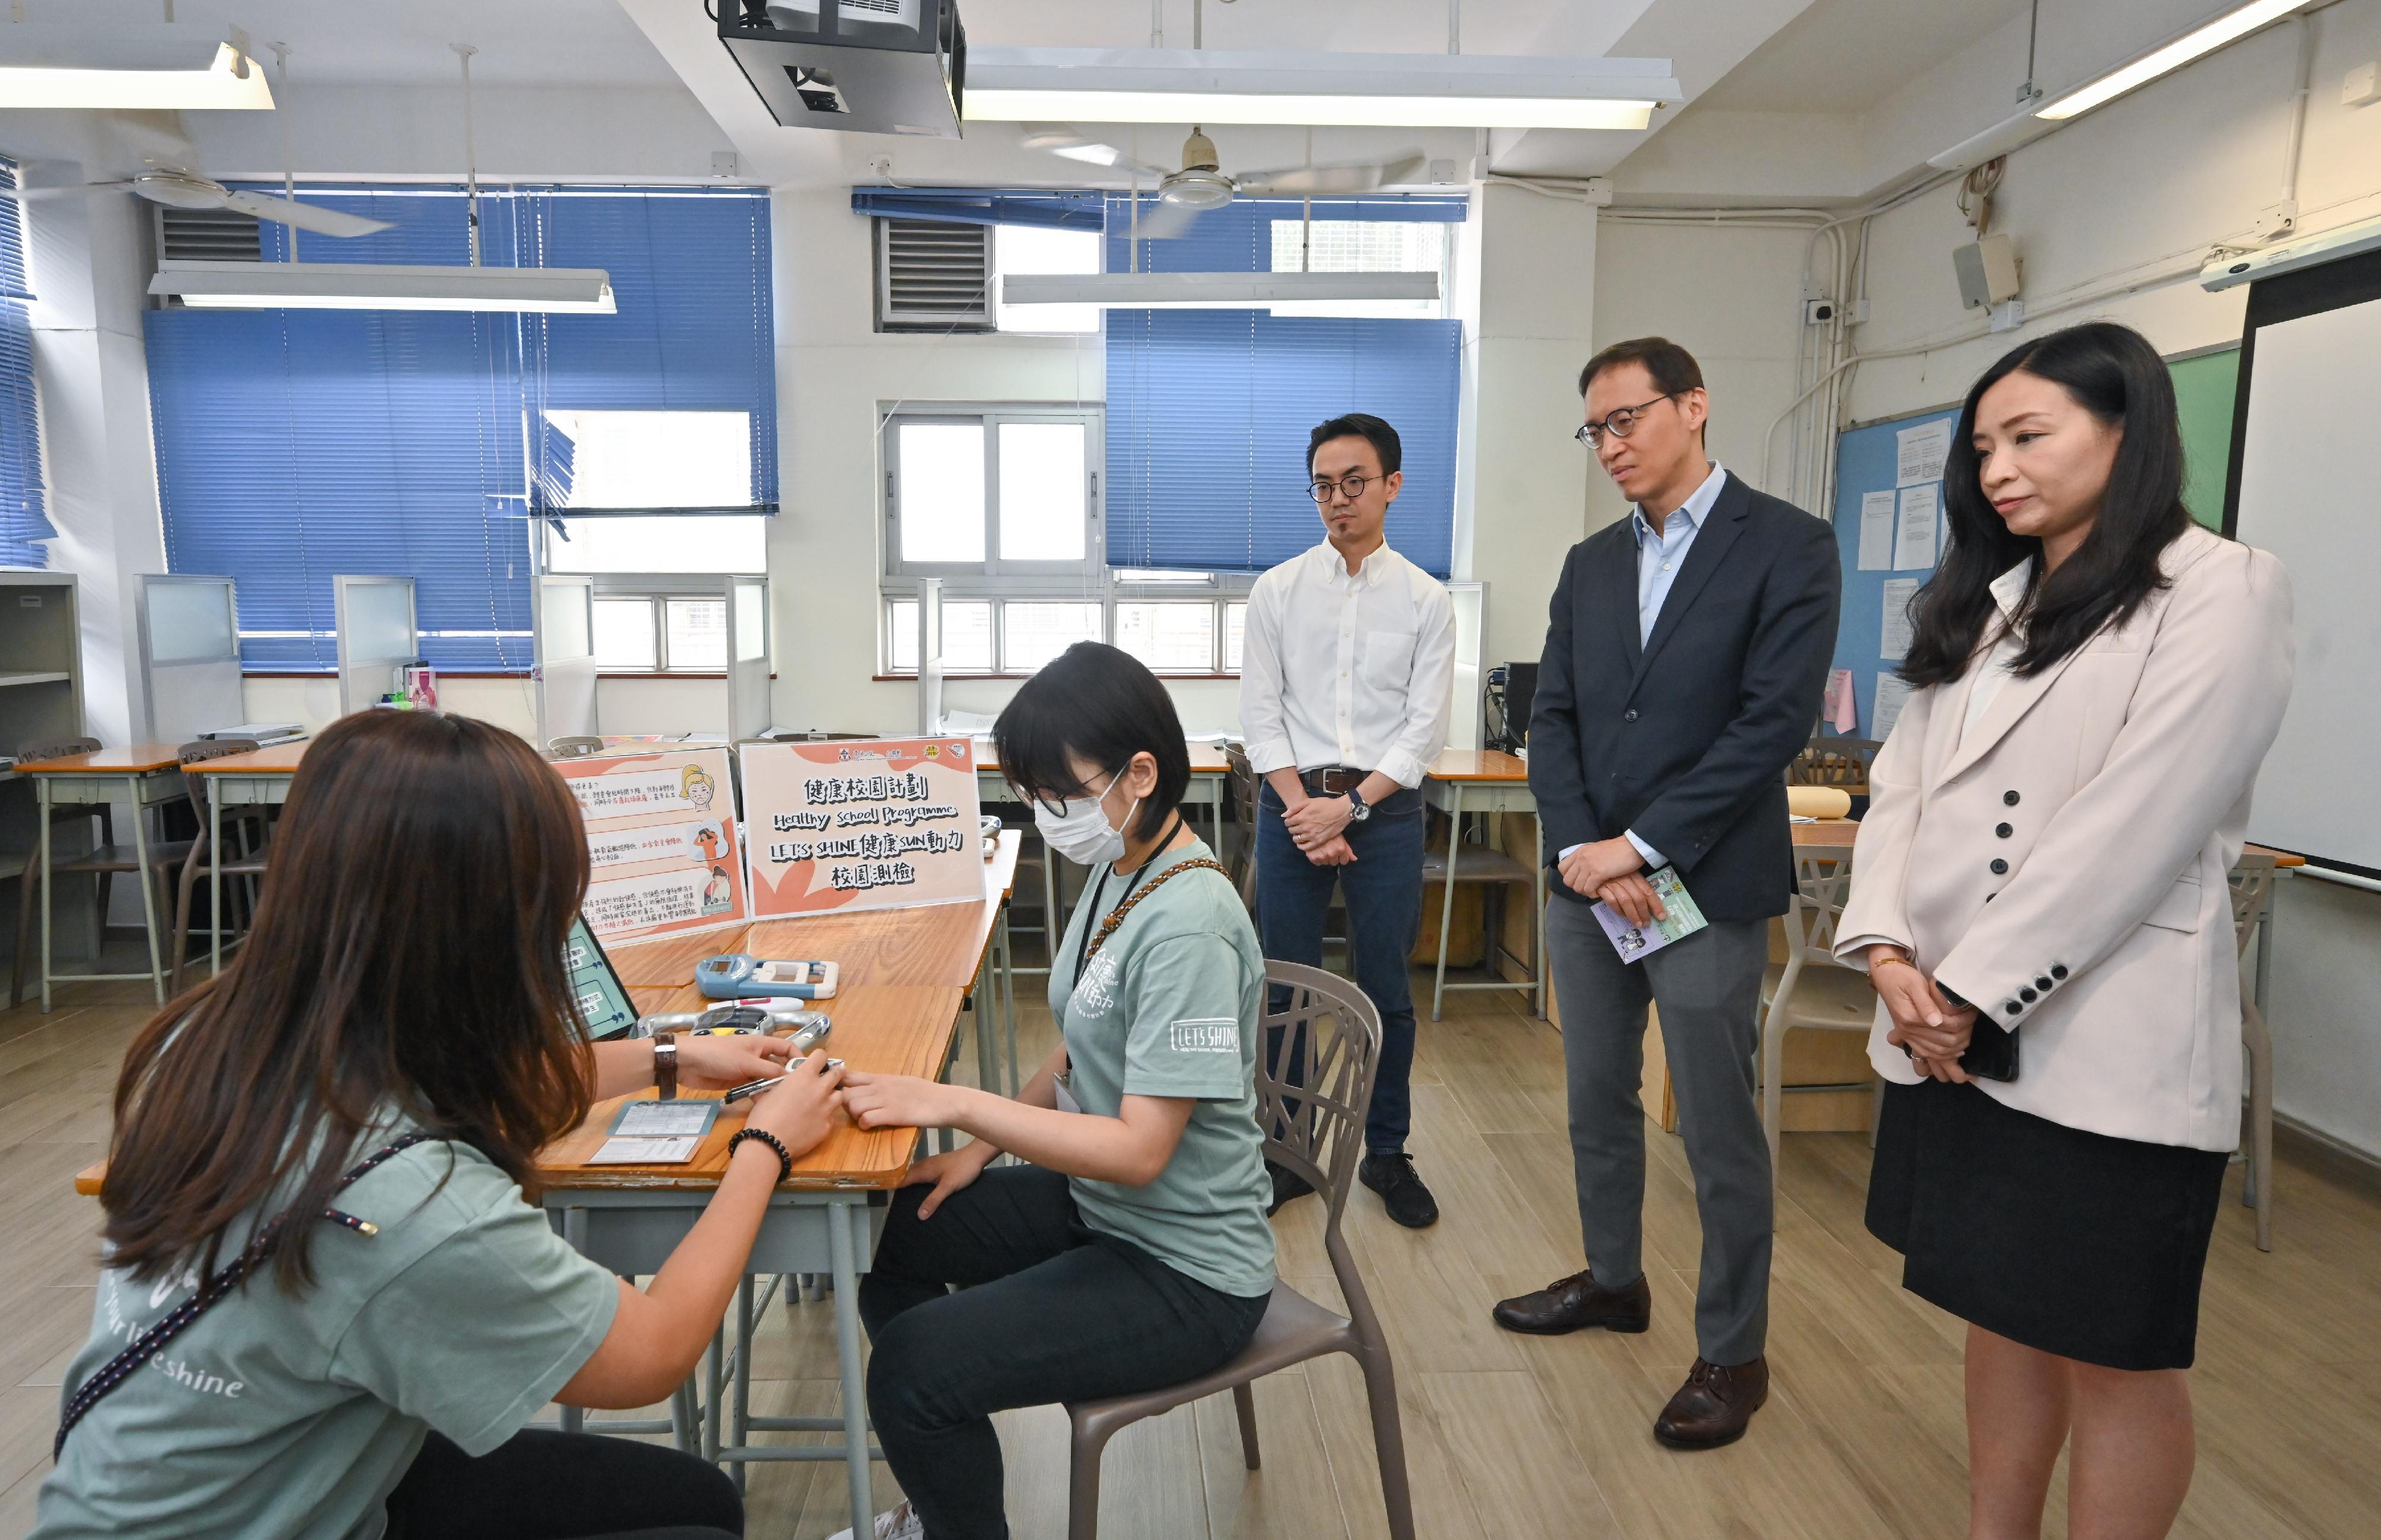 Representatives of the Narcotics Division of the Security Bureau visited the Tung Wah Group of Hospitals Kap Yan Directors' College today (April 26), which has participated in the Healthy School Programme for seven years, and exchanged views with teachers and students. Photo shows the Commissioner for Narcotics, Mr Kesson Lee (second right), learning more about the procedures of a simulated school drug test arranged by the Tung Wah Group of Hospitals Integrated Centre on Addiction Prevention and Treatment.